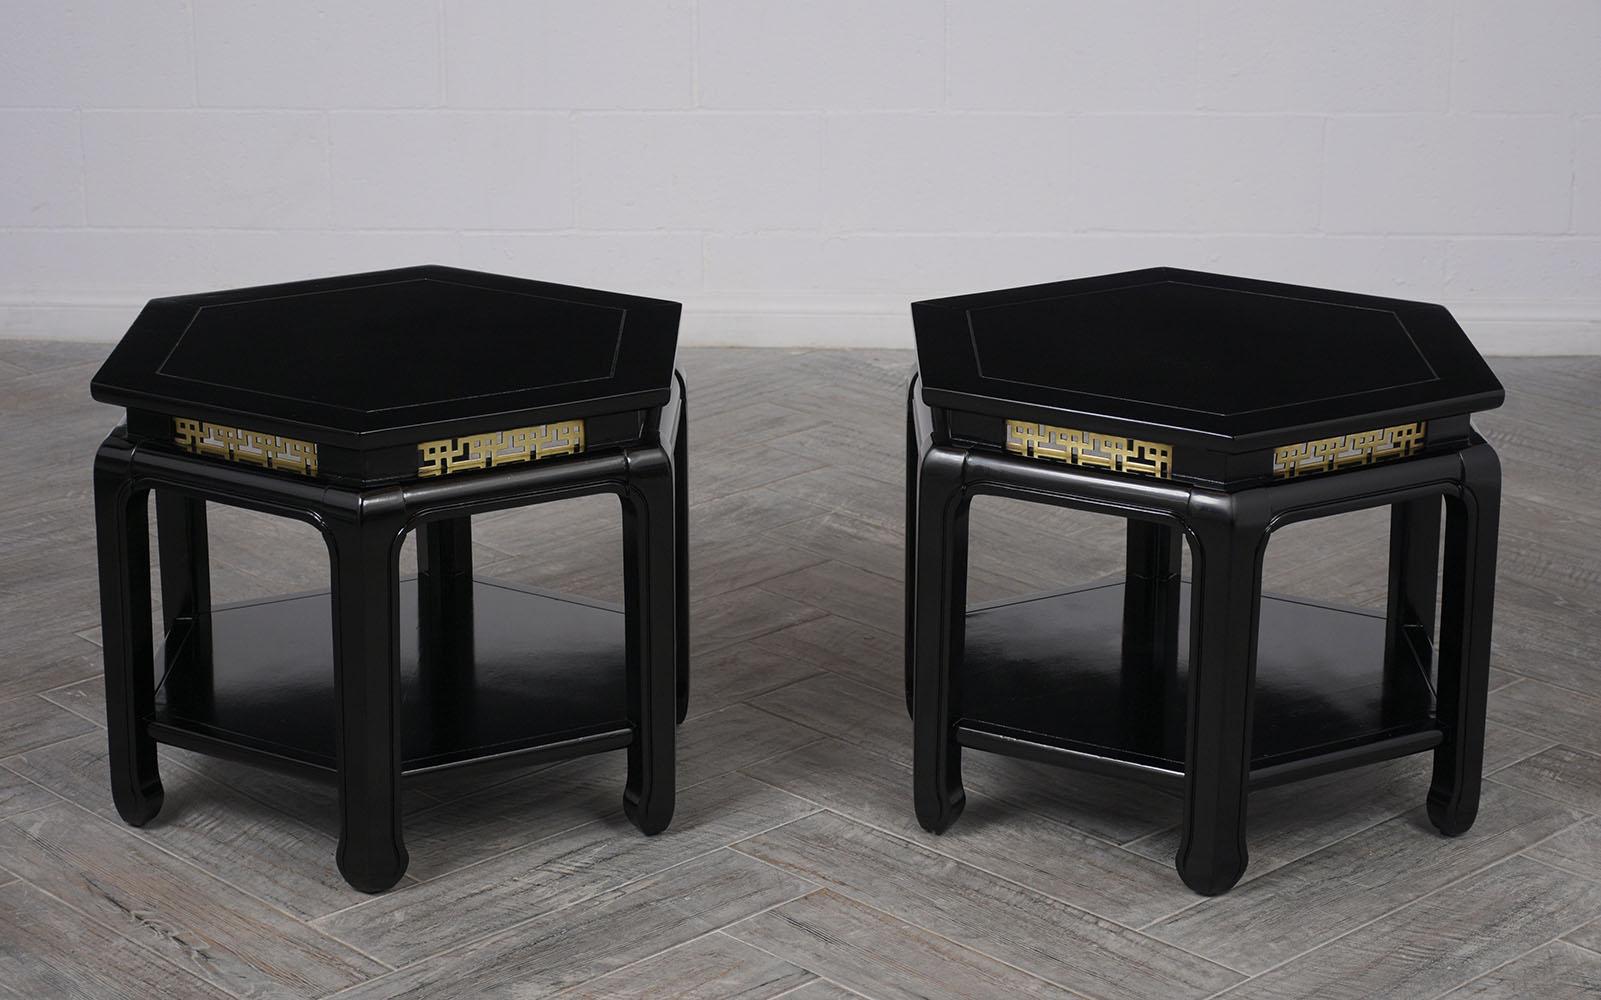 Elegant pair of 20th century hexagon side tables by J.B. Van Sciver Co. They have been newly ebonized. Solid mahogany wood top, followed by brass design decor on all sides, finished with six carved thick legs and a bottom shelve for extra space.